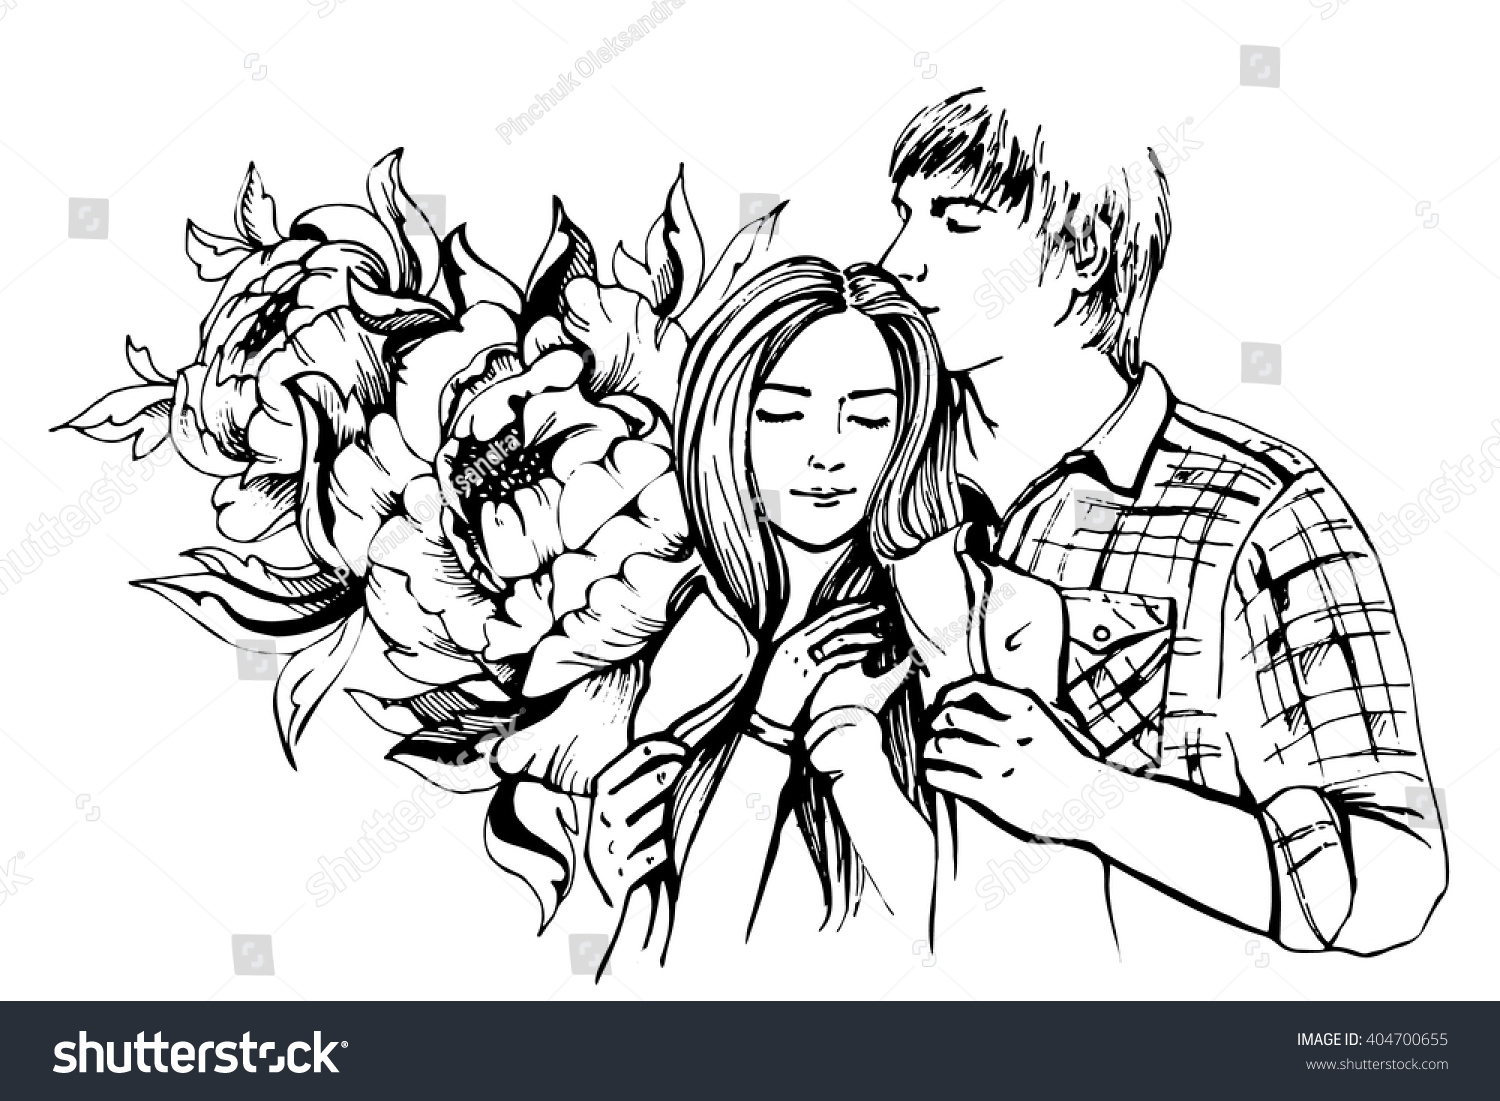 Young couple in love.Sensual sketch portrait of young stylish fashion couple. Embraces of a loving couple, couple hugging and flirting. Hand drawn vector illustration